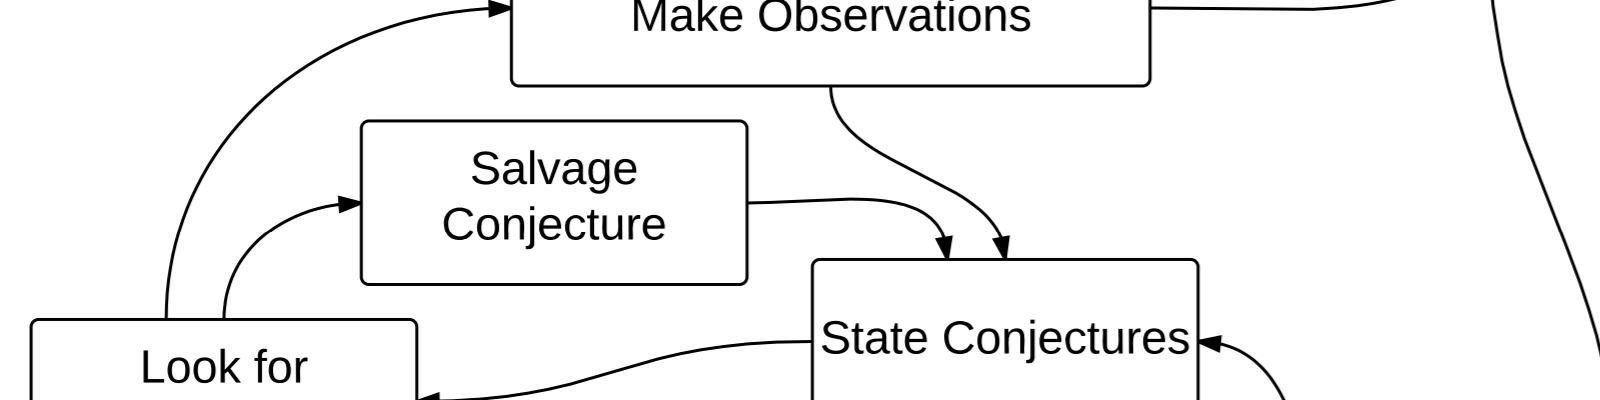 Make Observations arrow to State Conjectures